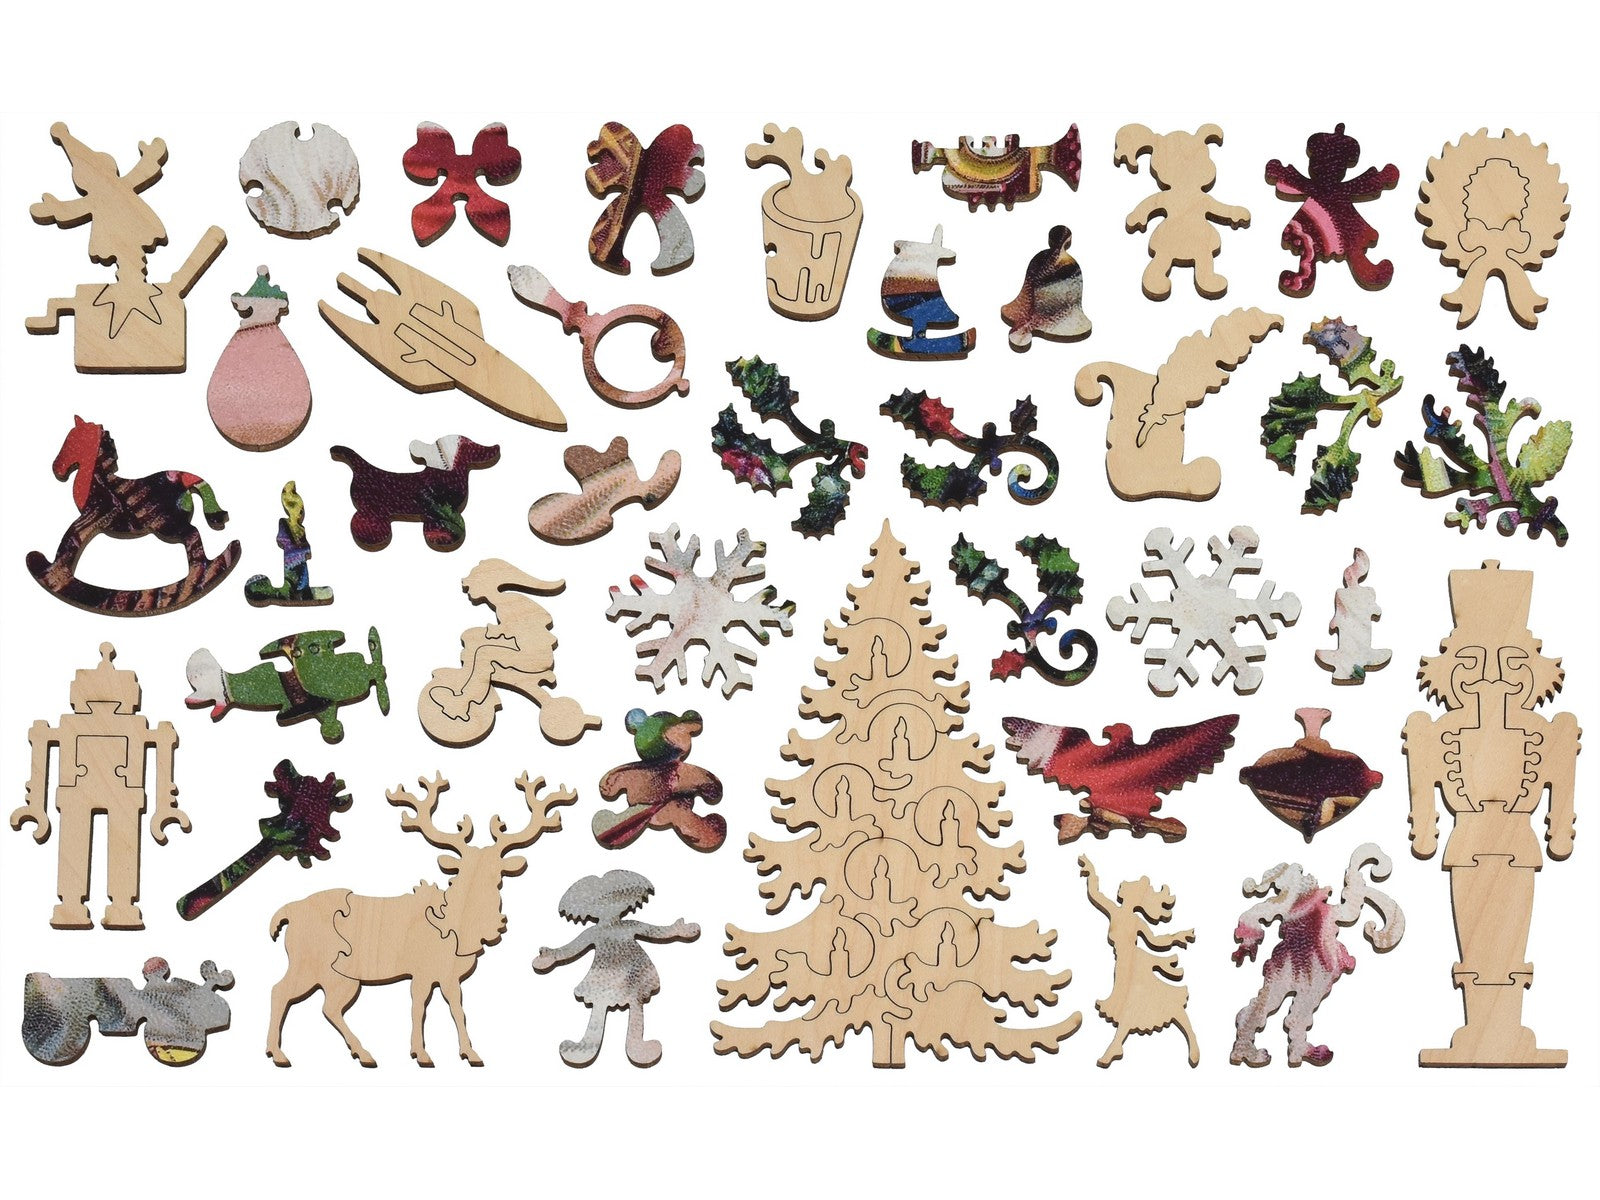 The whimsies that can be found in the puzzle, Toys a Plenty.